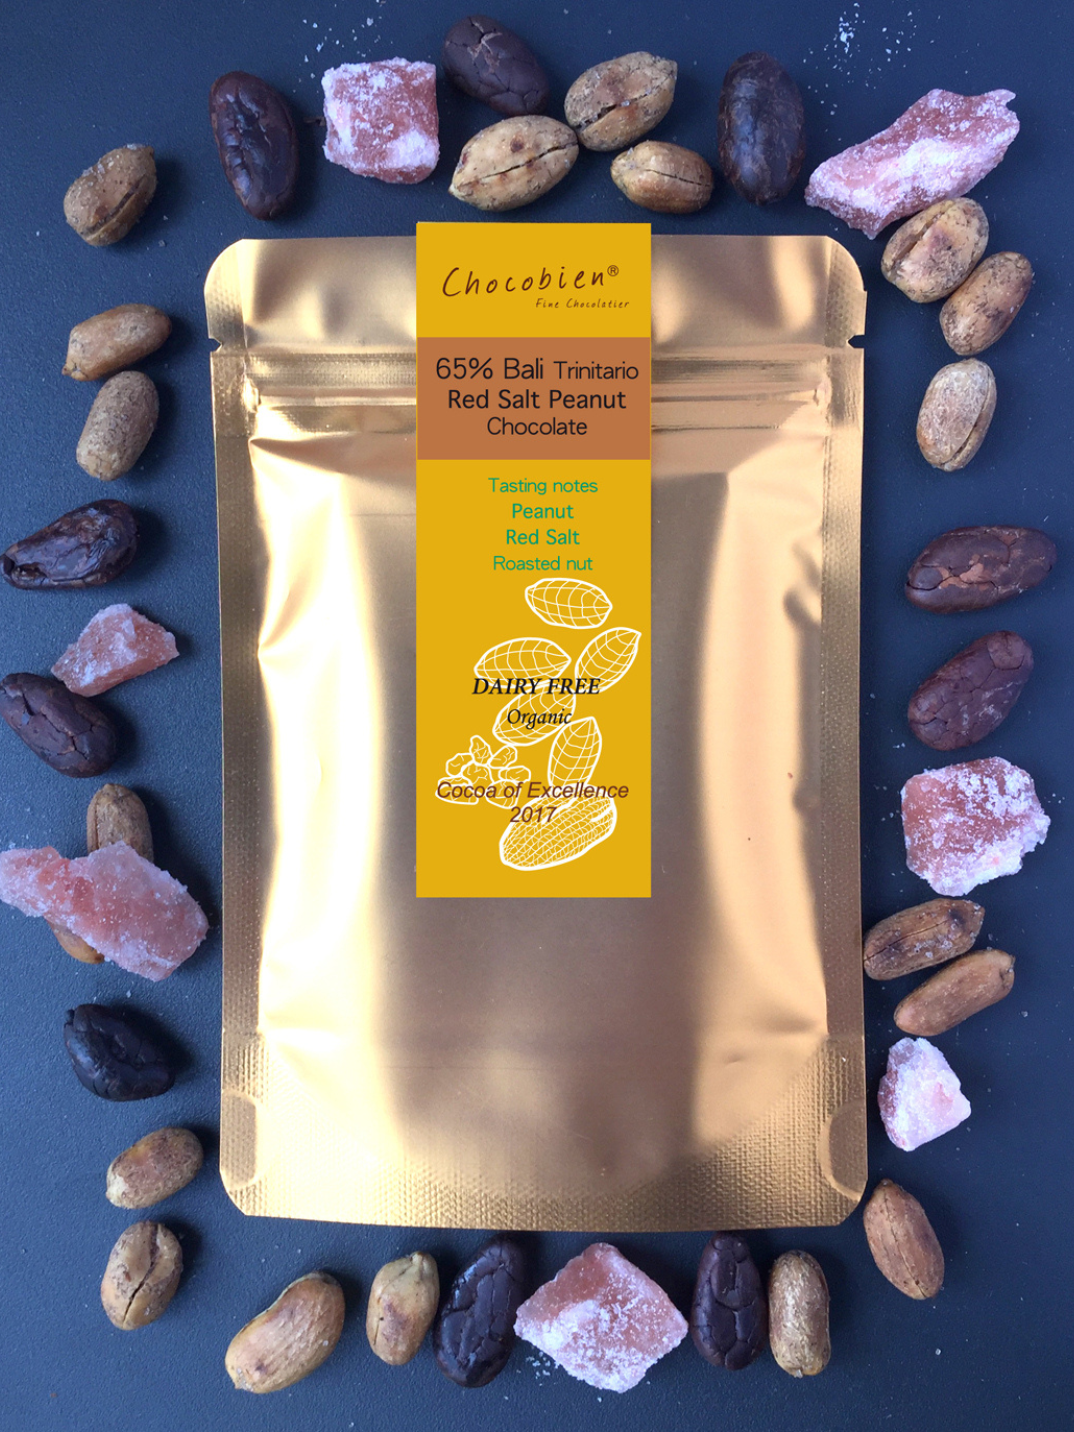 The first salty flavour of chocolate in our products - Made by the winner of Cocoa of Excellence 2017 - Bali Trinitario cacao bean, Himalayan red salt and organic peanut.  Editor's notes: Himalayan red salt consists of more minerals than sea salt, especially lesser-known minerals like strontium and molybdenum, so it tastes different from sea salt, the crunchy peanut, sparkling salty,  its in depth complicate and fantastic taste of nutty of cacao is so interesting!